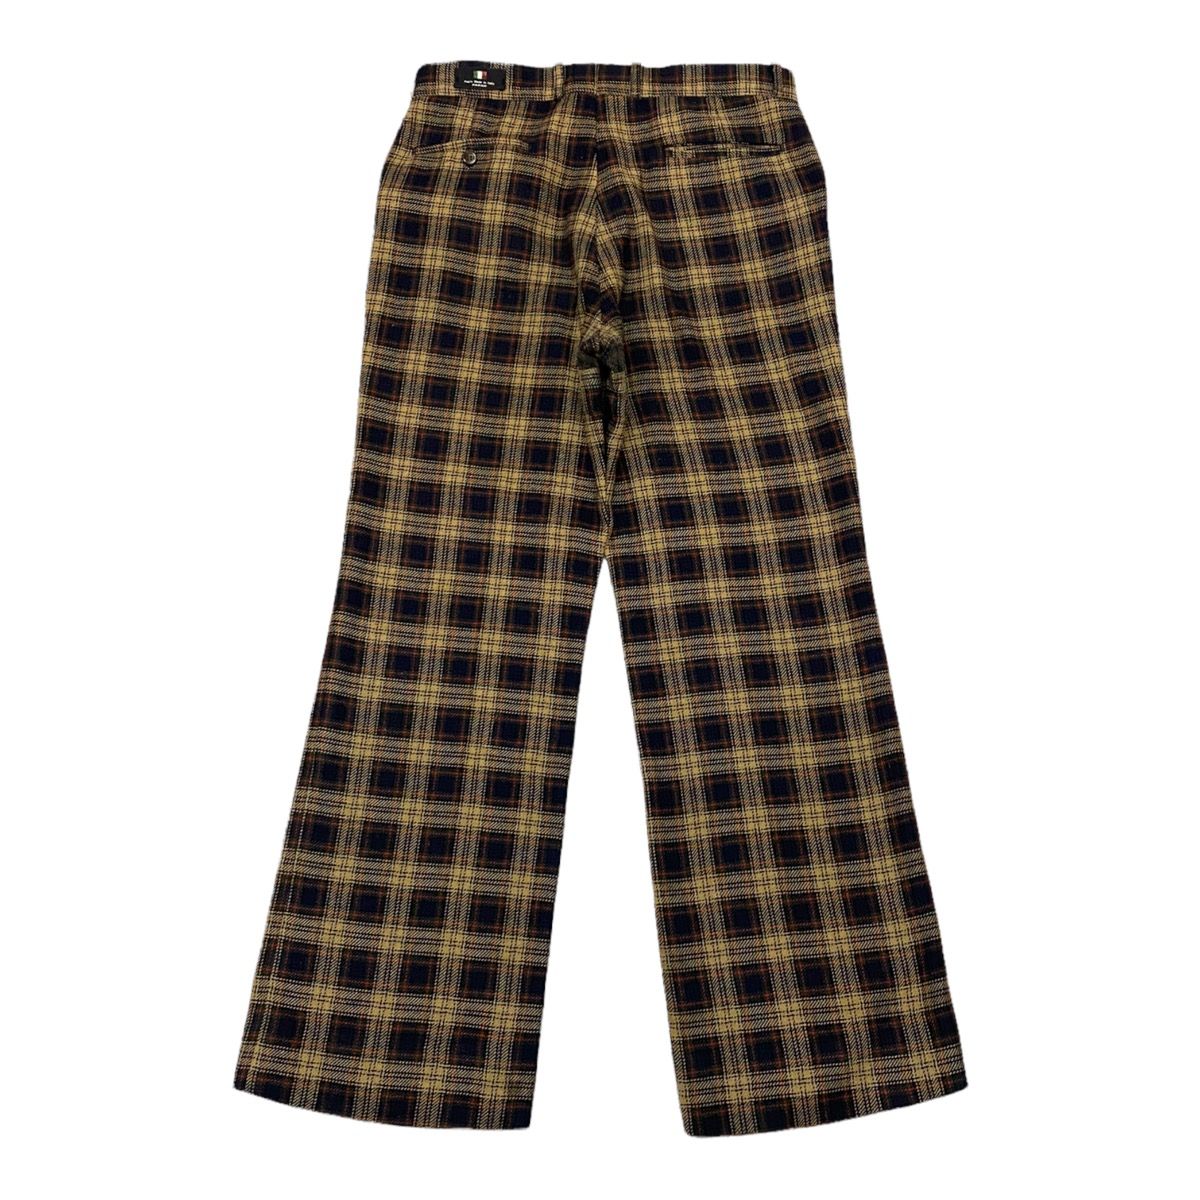 Archival Clothing - 🔥FARAH AW1998 CHECKED PLAID WOOL PANTS MADE IN ITALY - 2